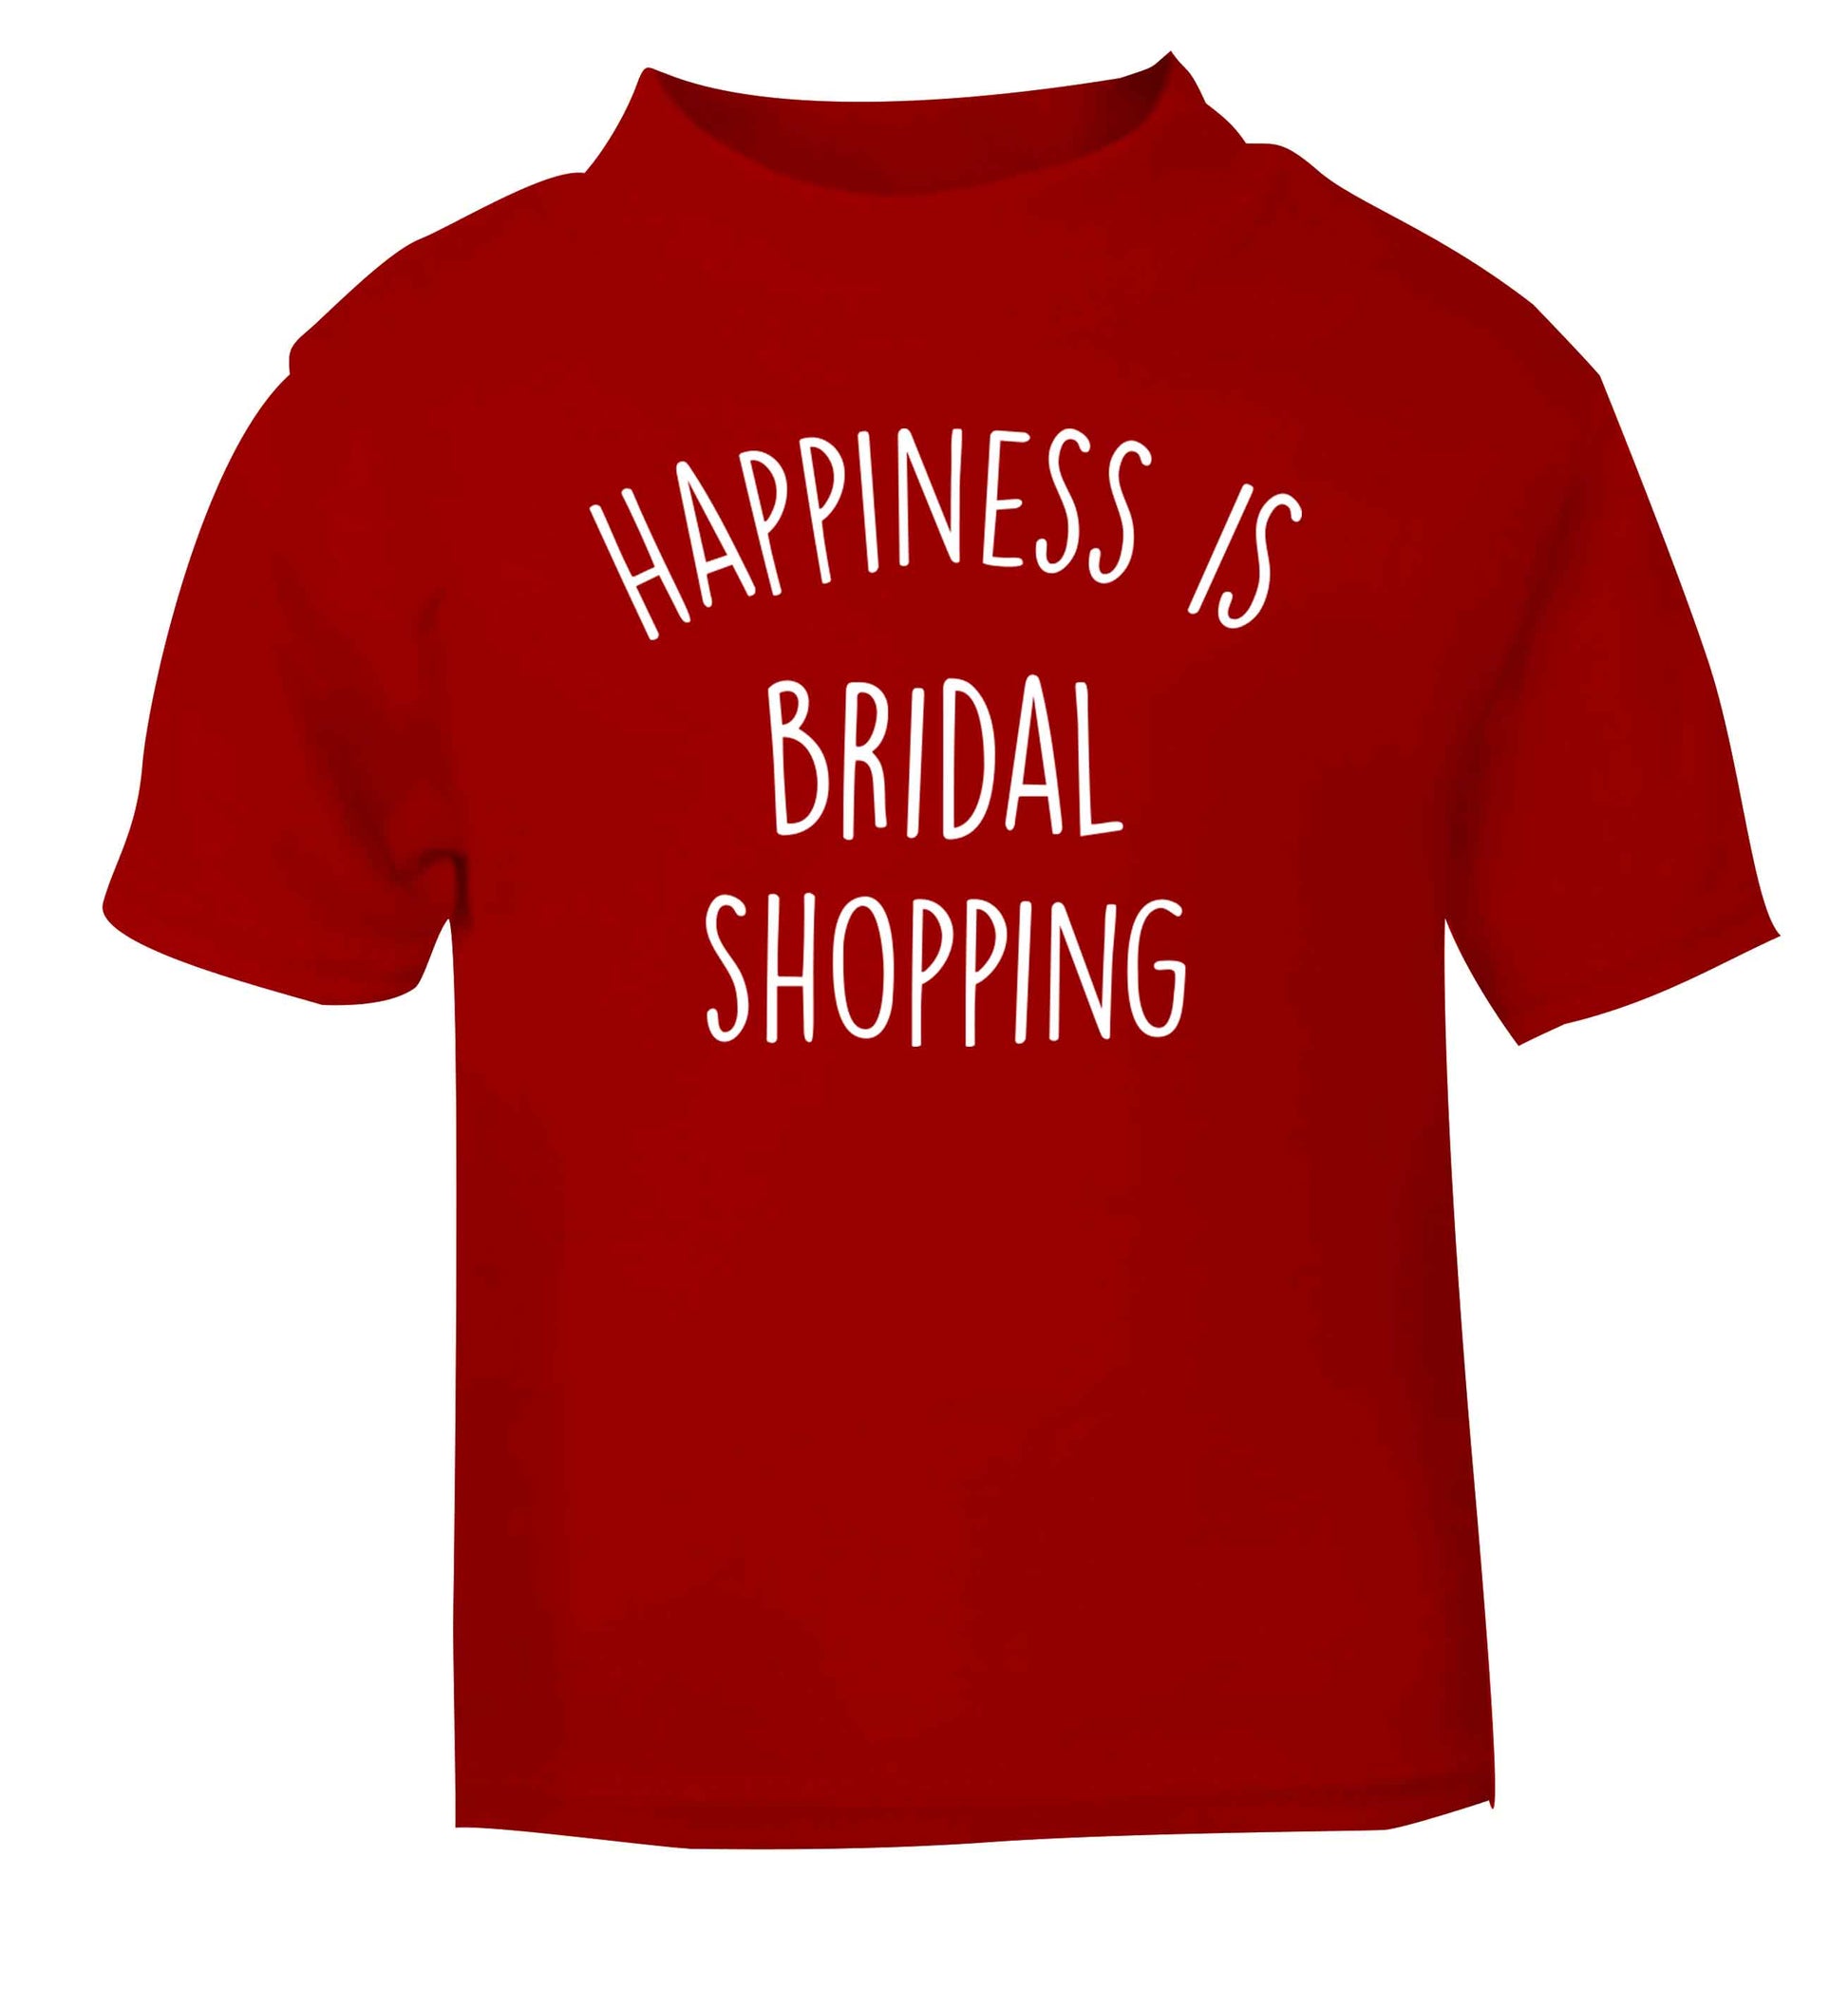 Happiness is bridal shopping red baby toddler Tshirt 2 Years